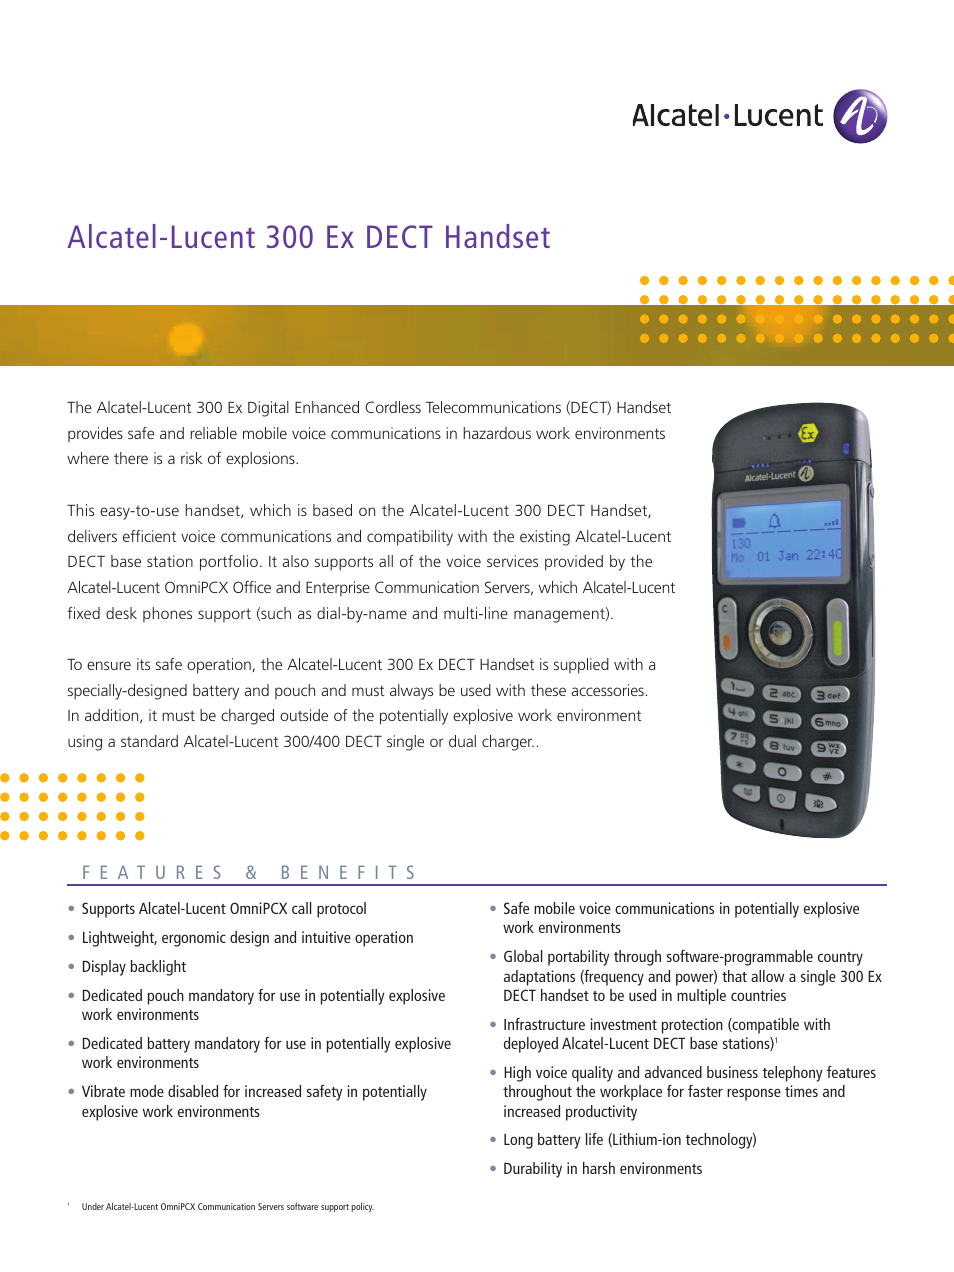 Alcatel-Lucent 300 Ex User Manual | 2 pages